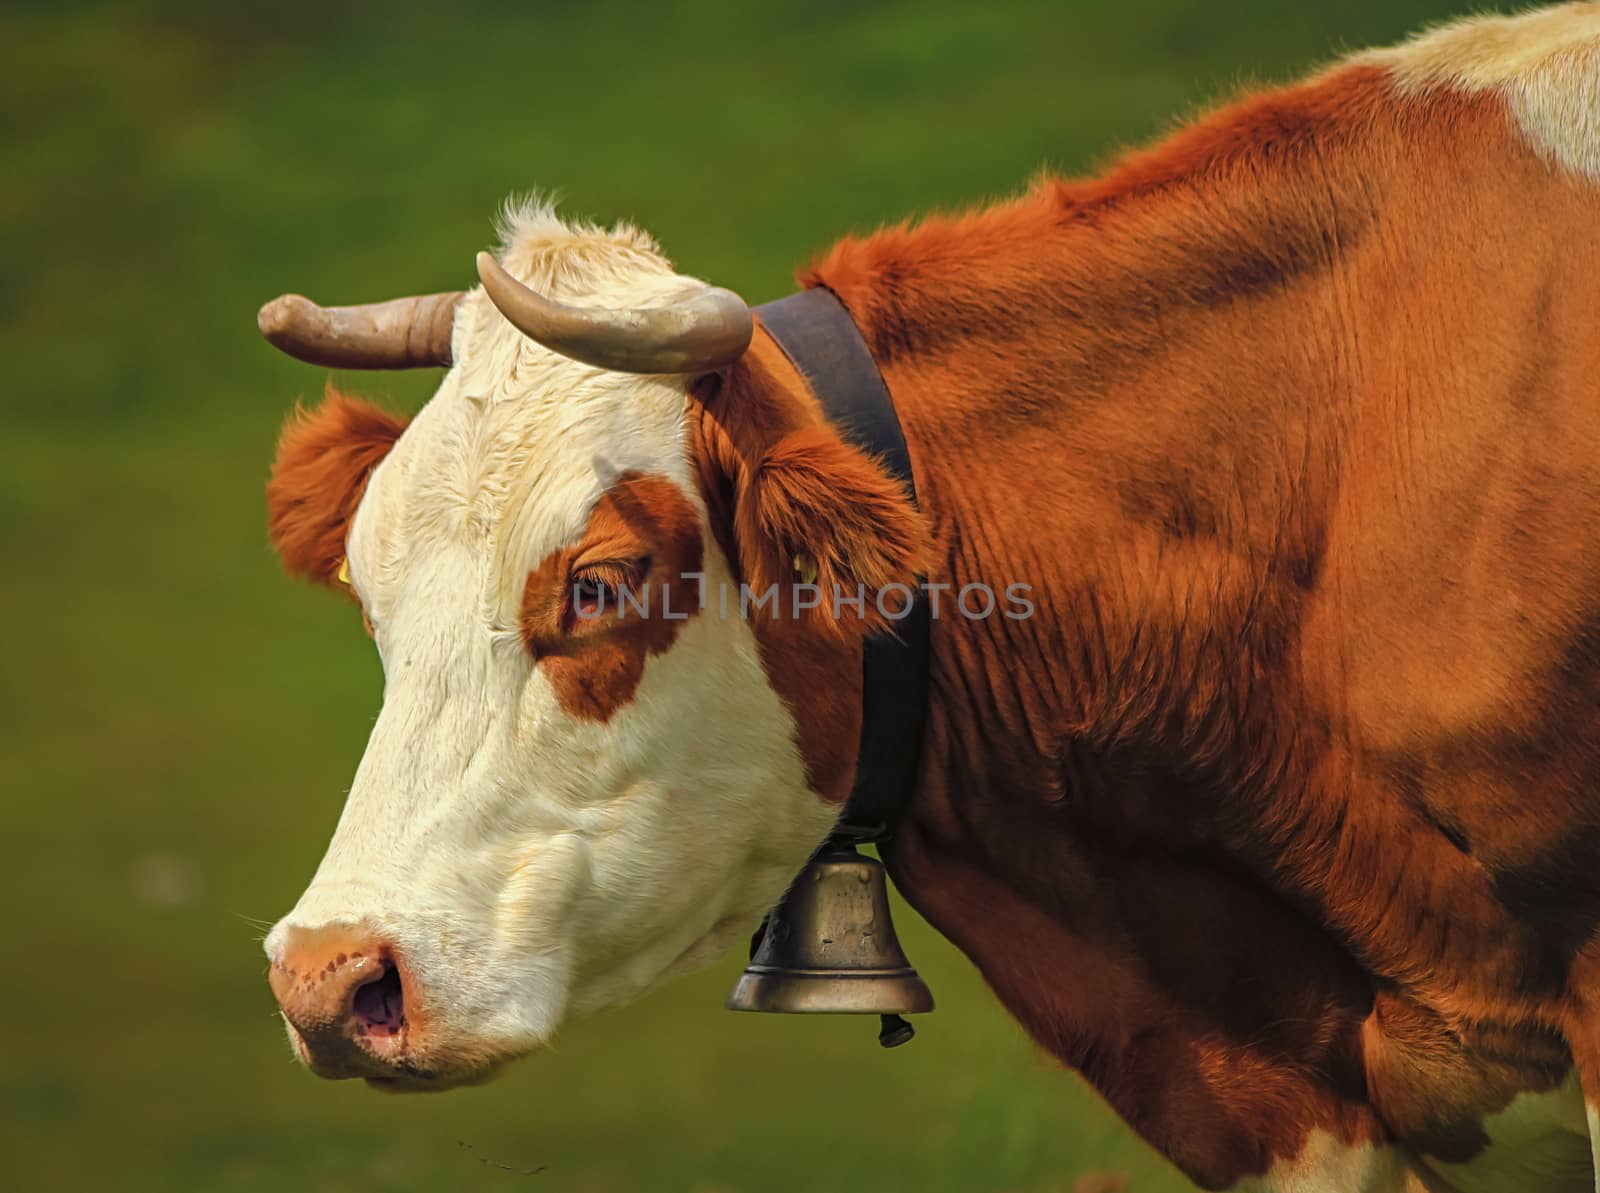 Hereford cow portrait and bell by Elenaphotos21